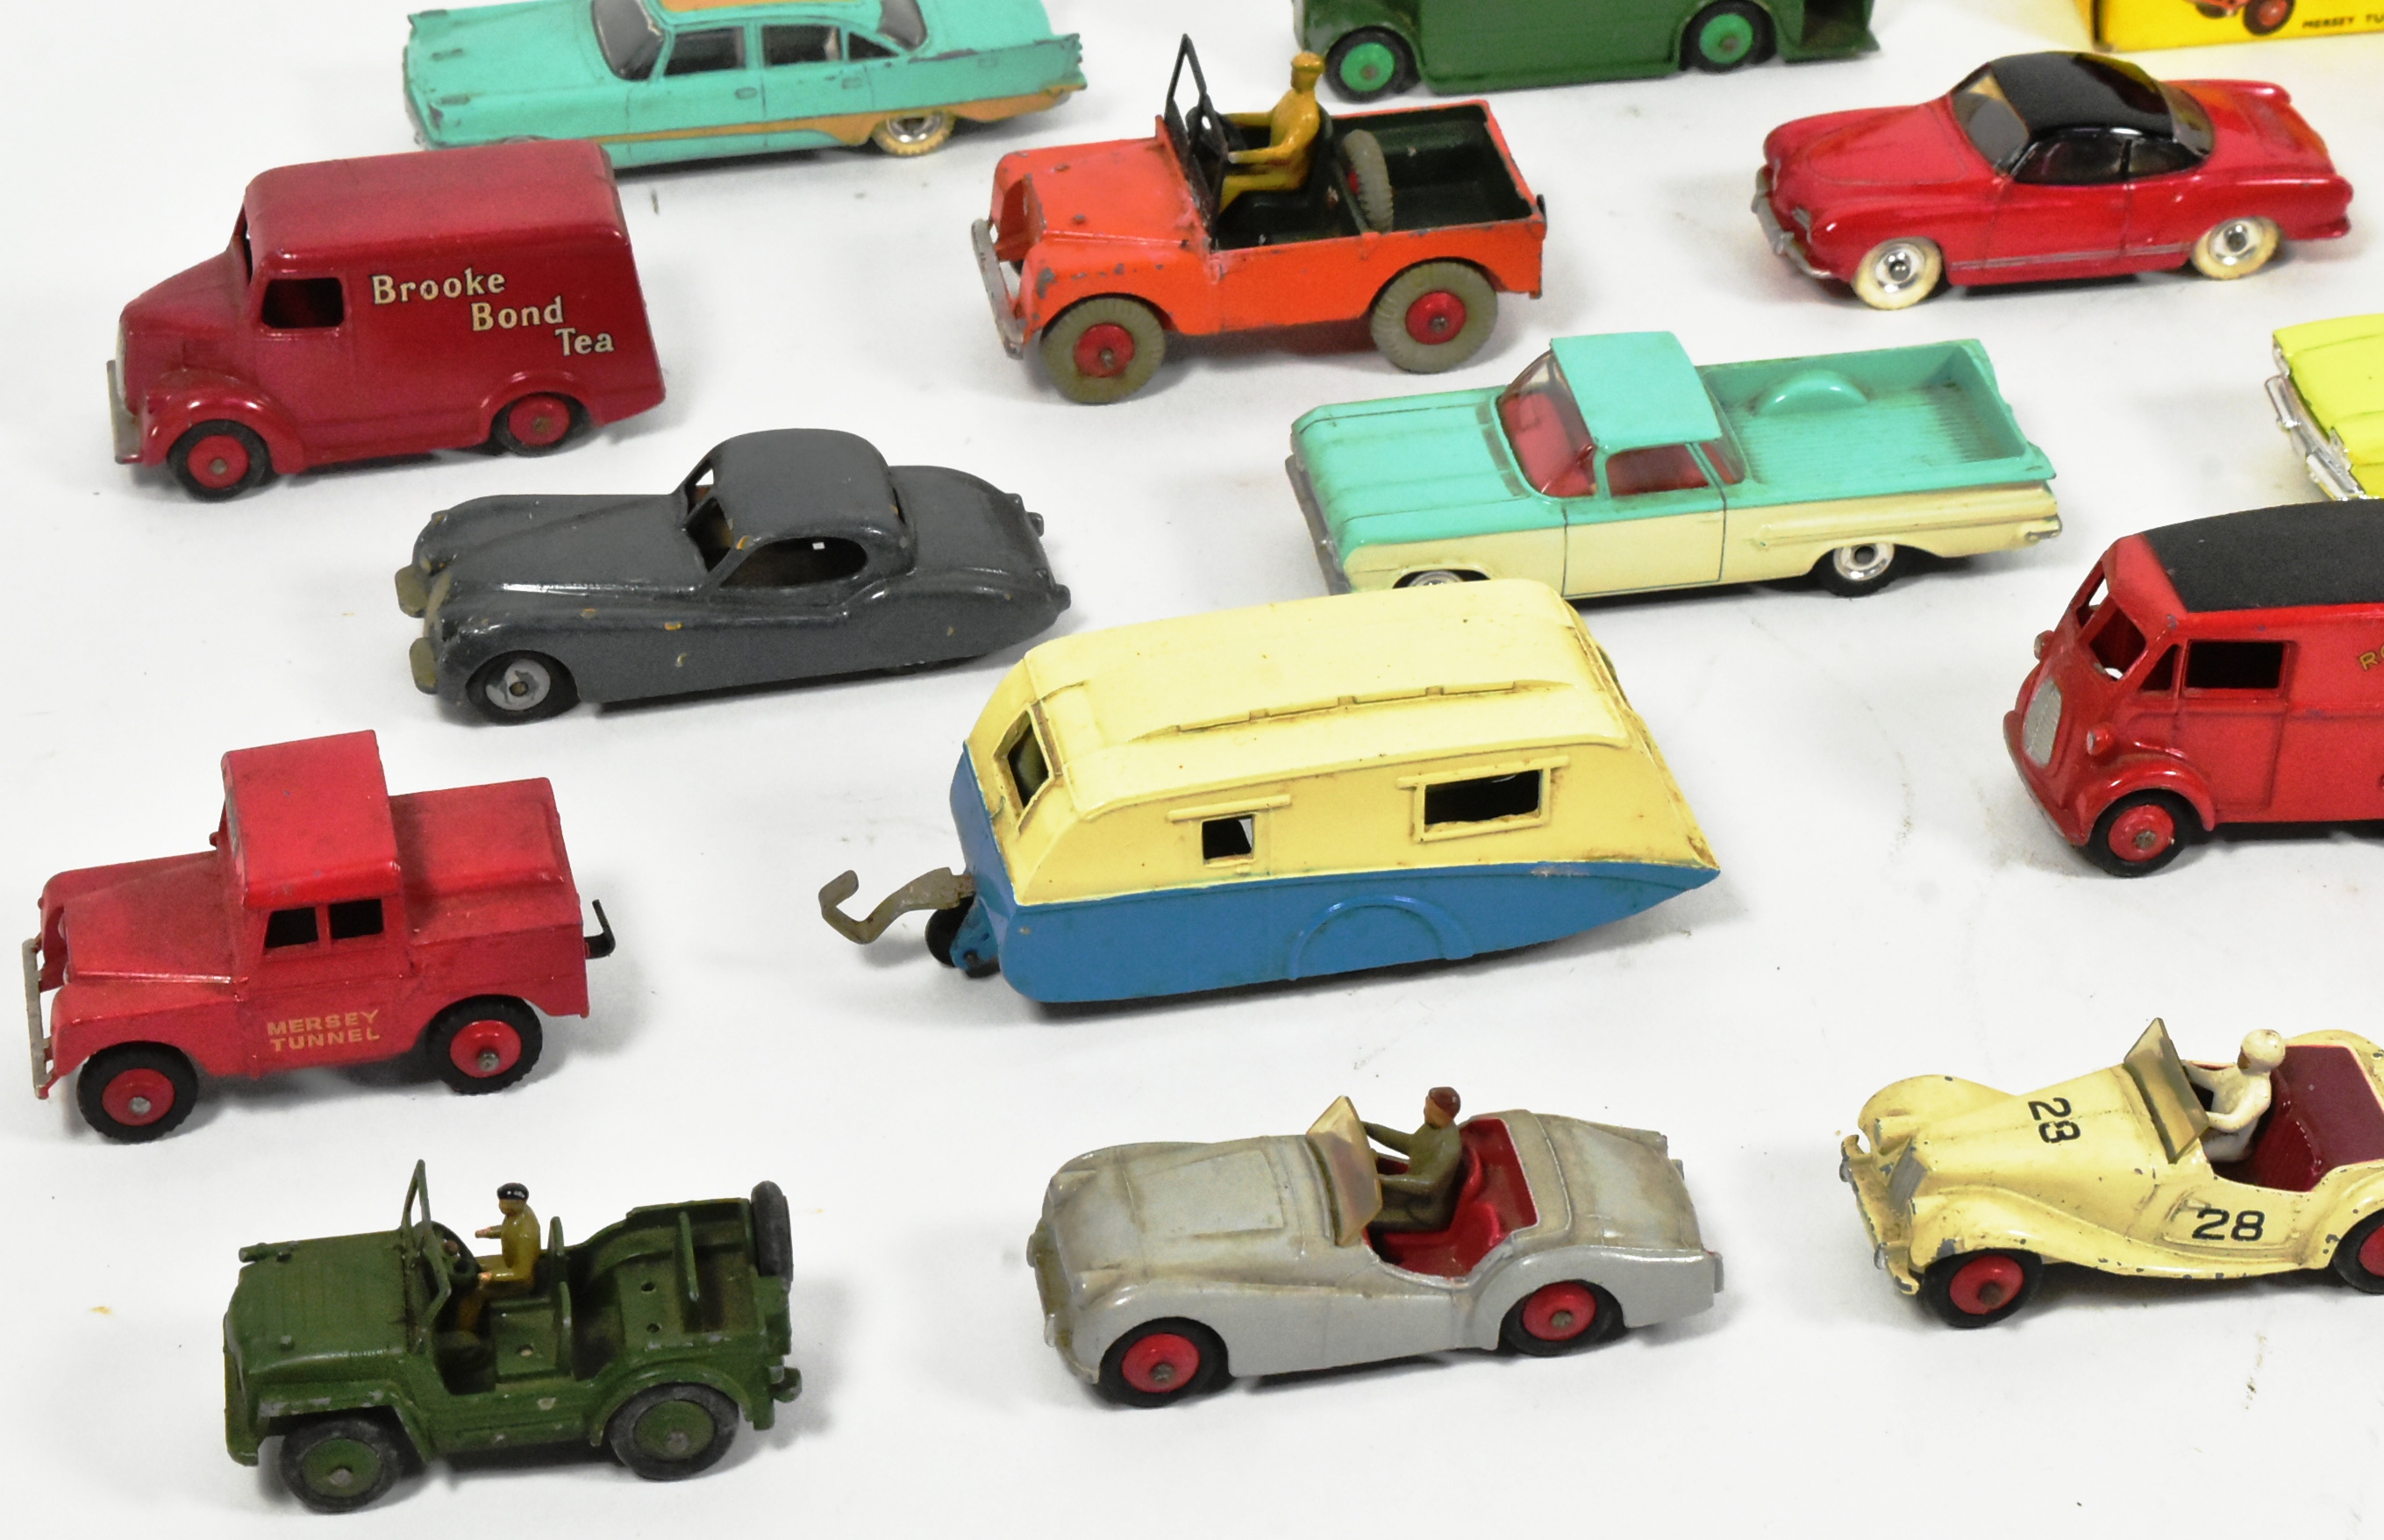 DIECAST - COLLECTION OF VINTAGE DINKY TOYS DIECAST MODELS - Image 4 of 6